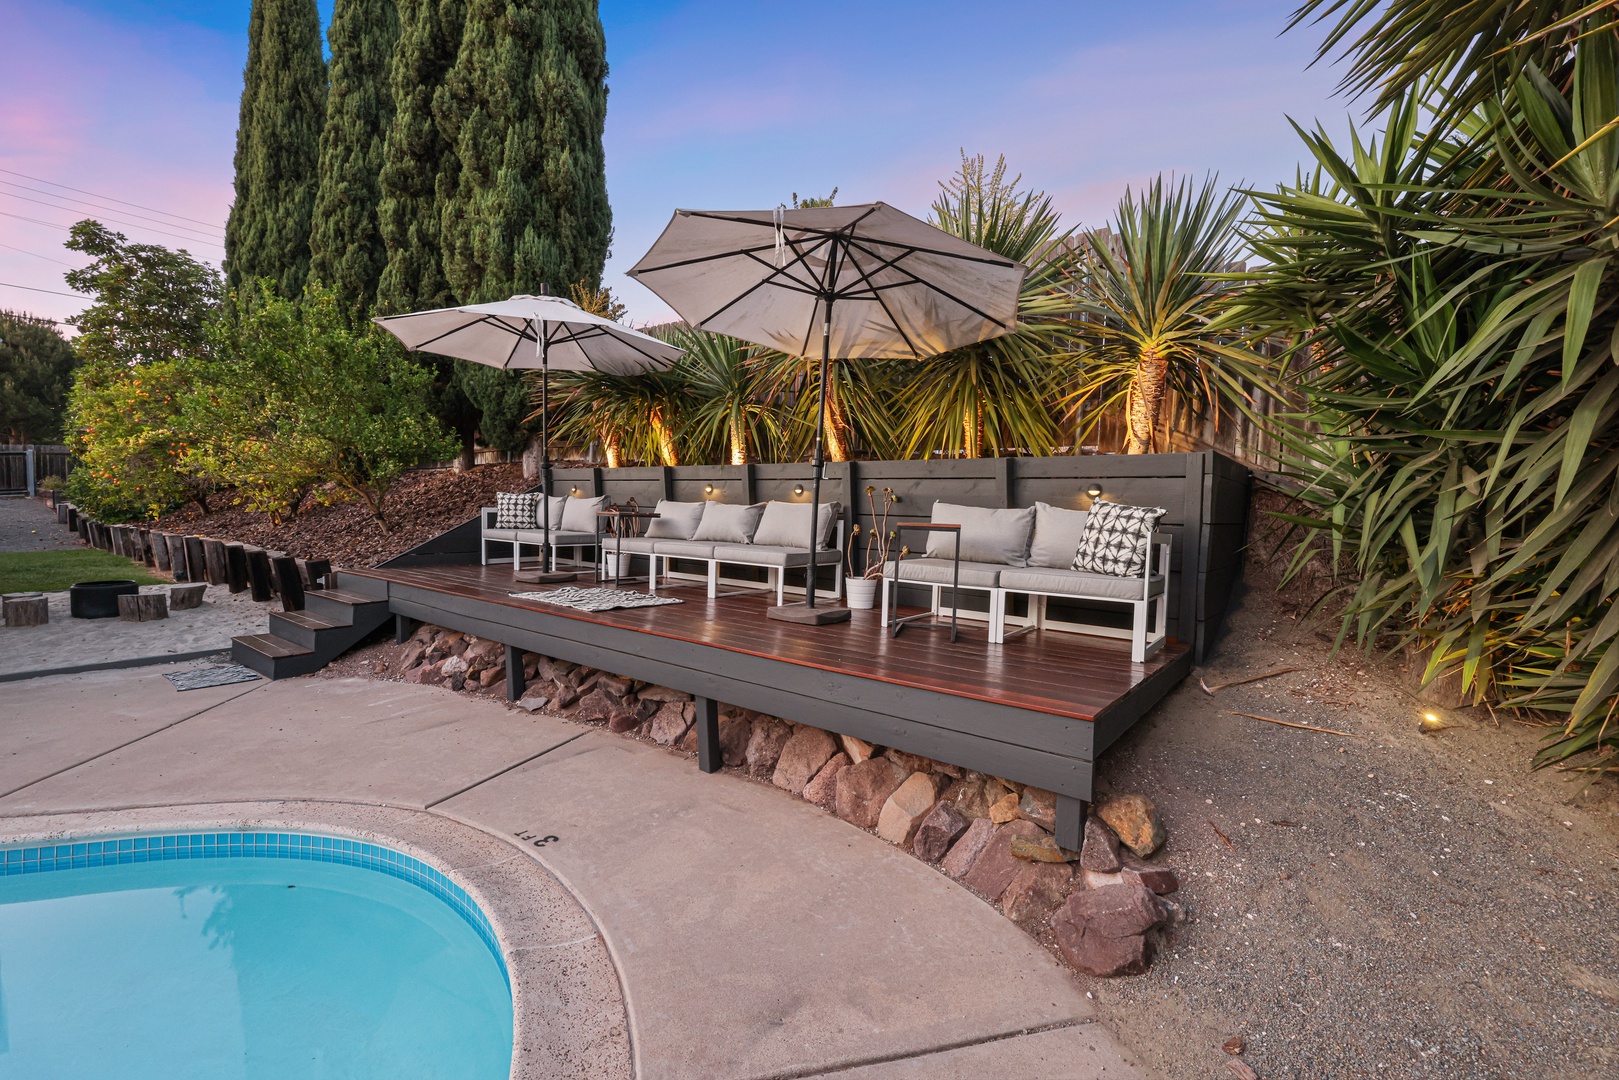 Private pool and hot tub, fruit trees and lots of lounge areas